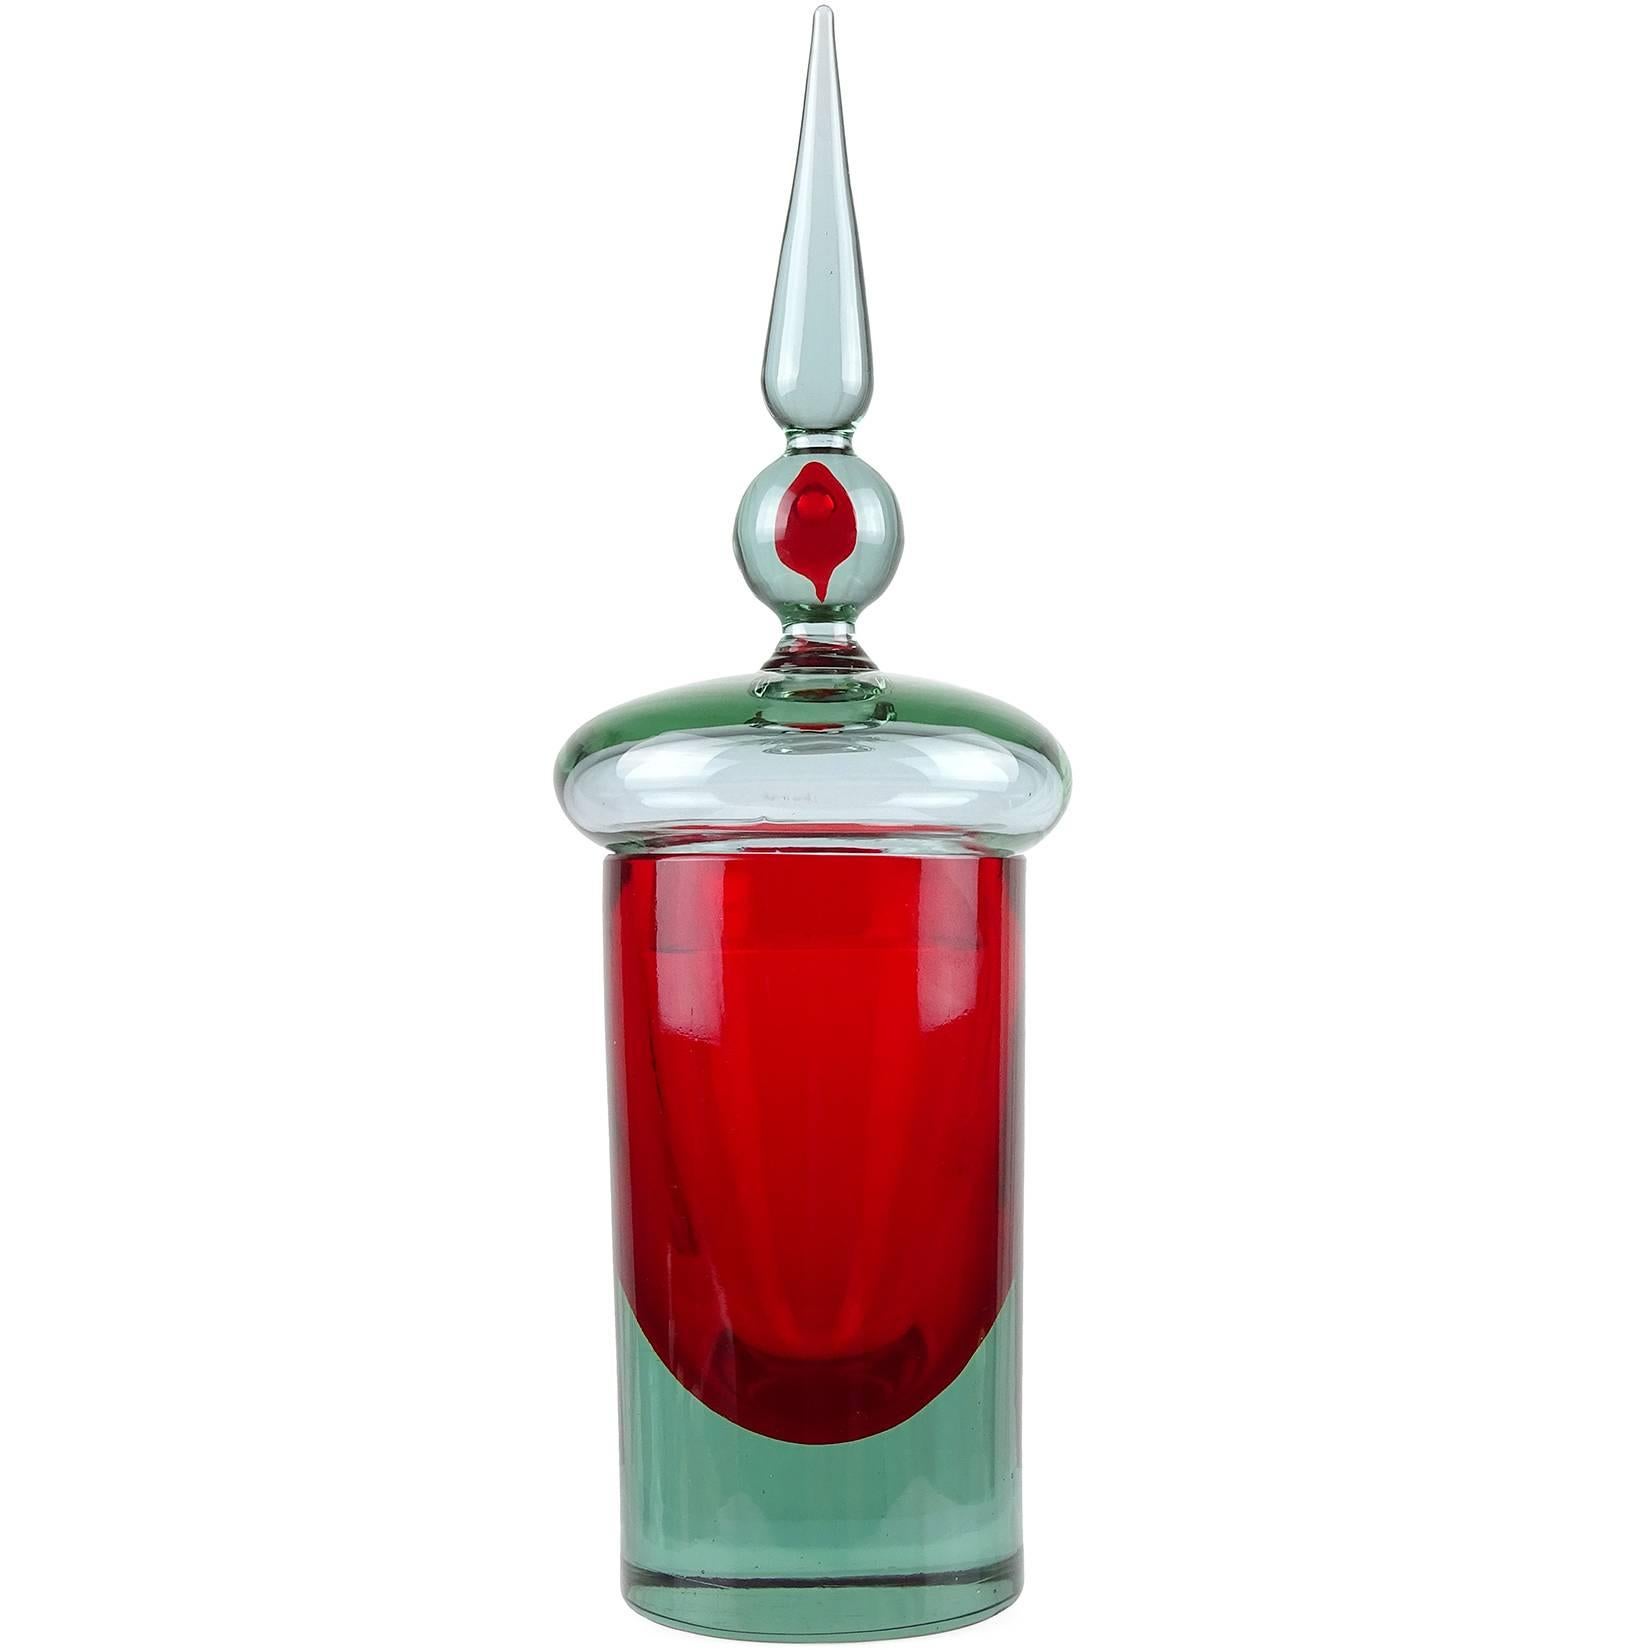 Beautiful large, vintage Murano hand blown Sommerso red and light blue / purple “Alexandrite” Italian art glass rocket shaped container / jar. Attributed to designer Antonio da Ros, for the Cenedese company. Made with Neodymium glass, which changes